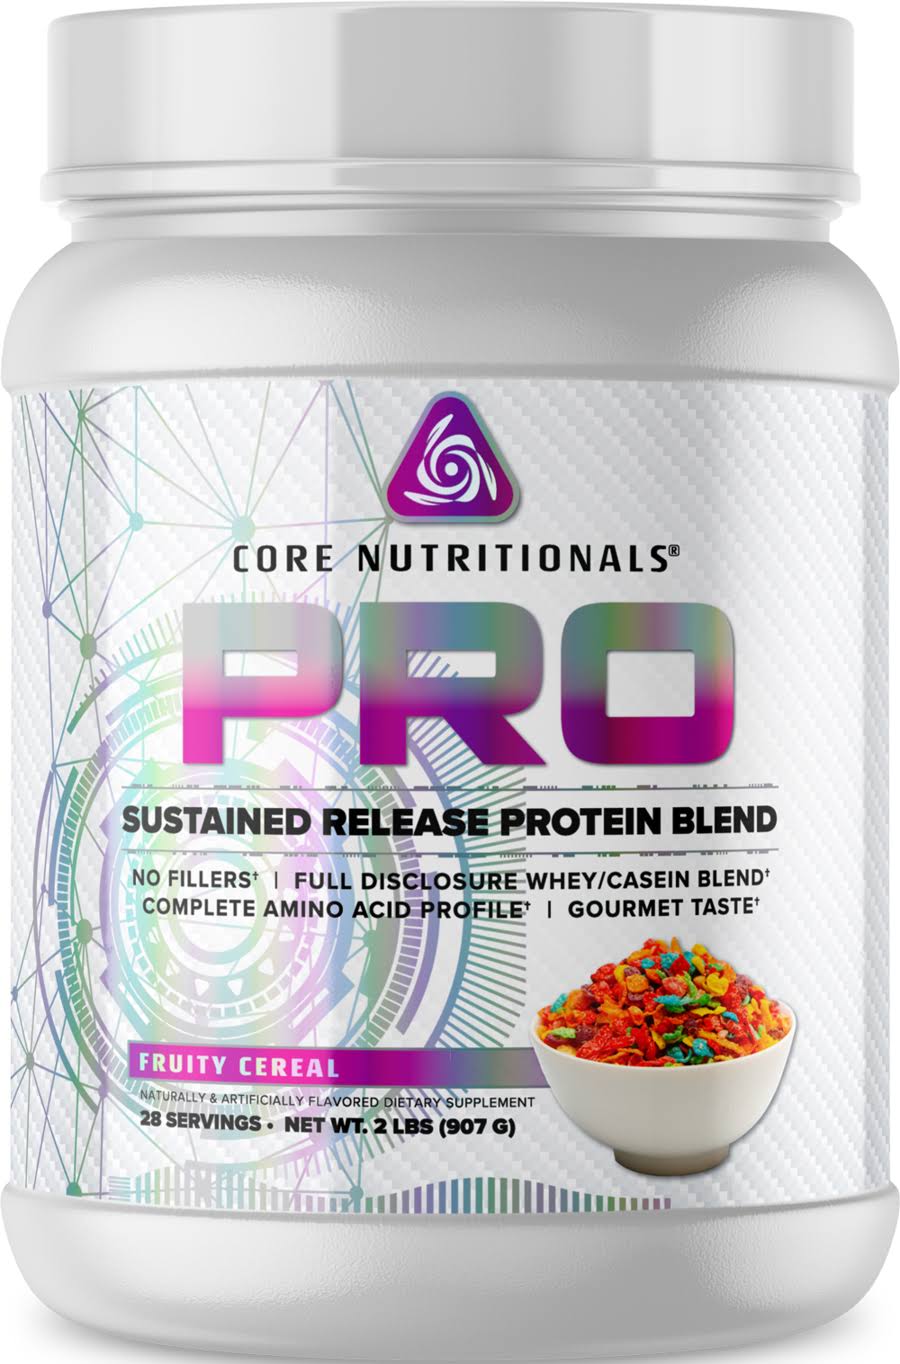 Core Nutritionals Core Pro 25 - 907 G - Death by Chocolate